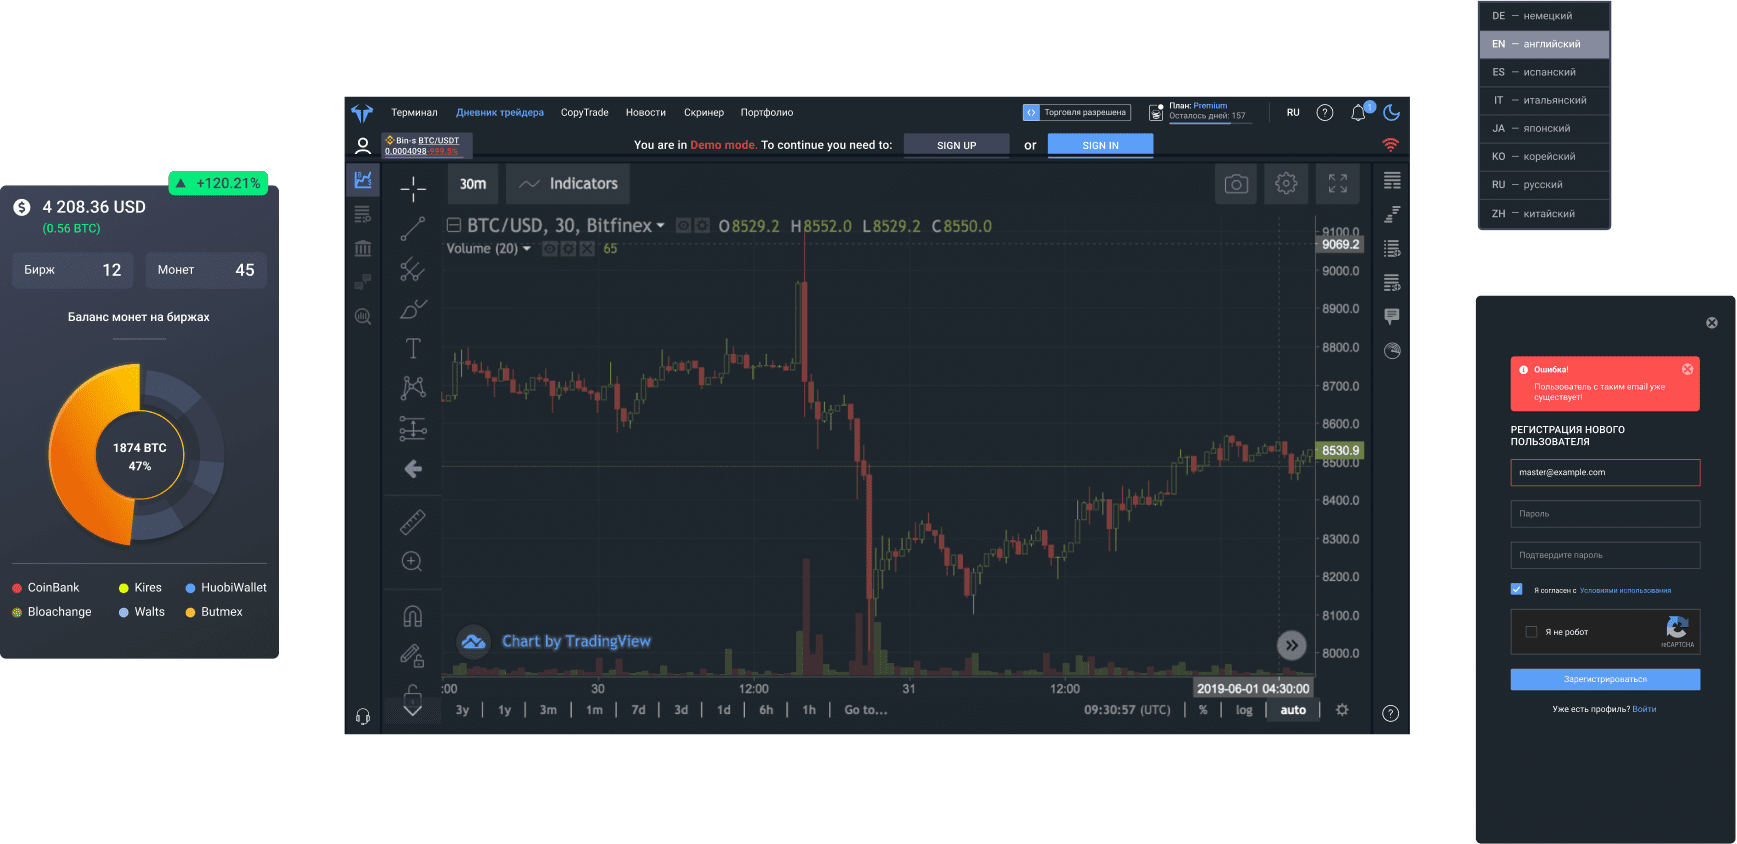 Crypto trading online tool dashboard